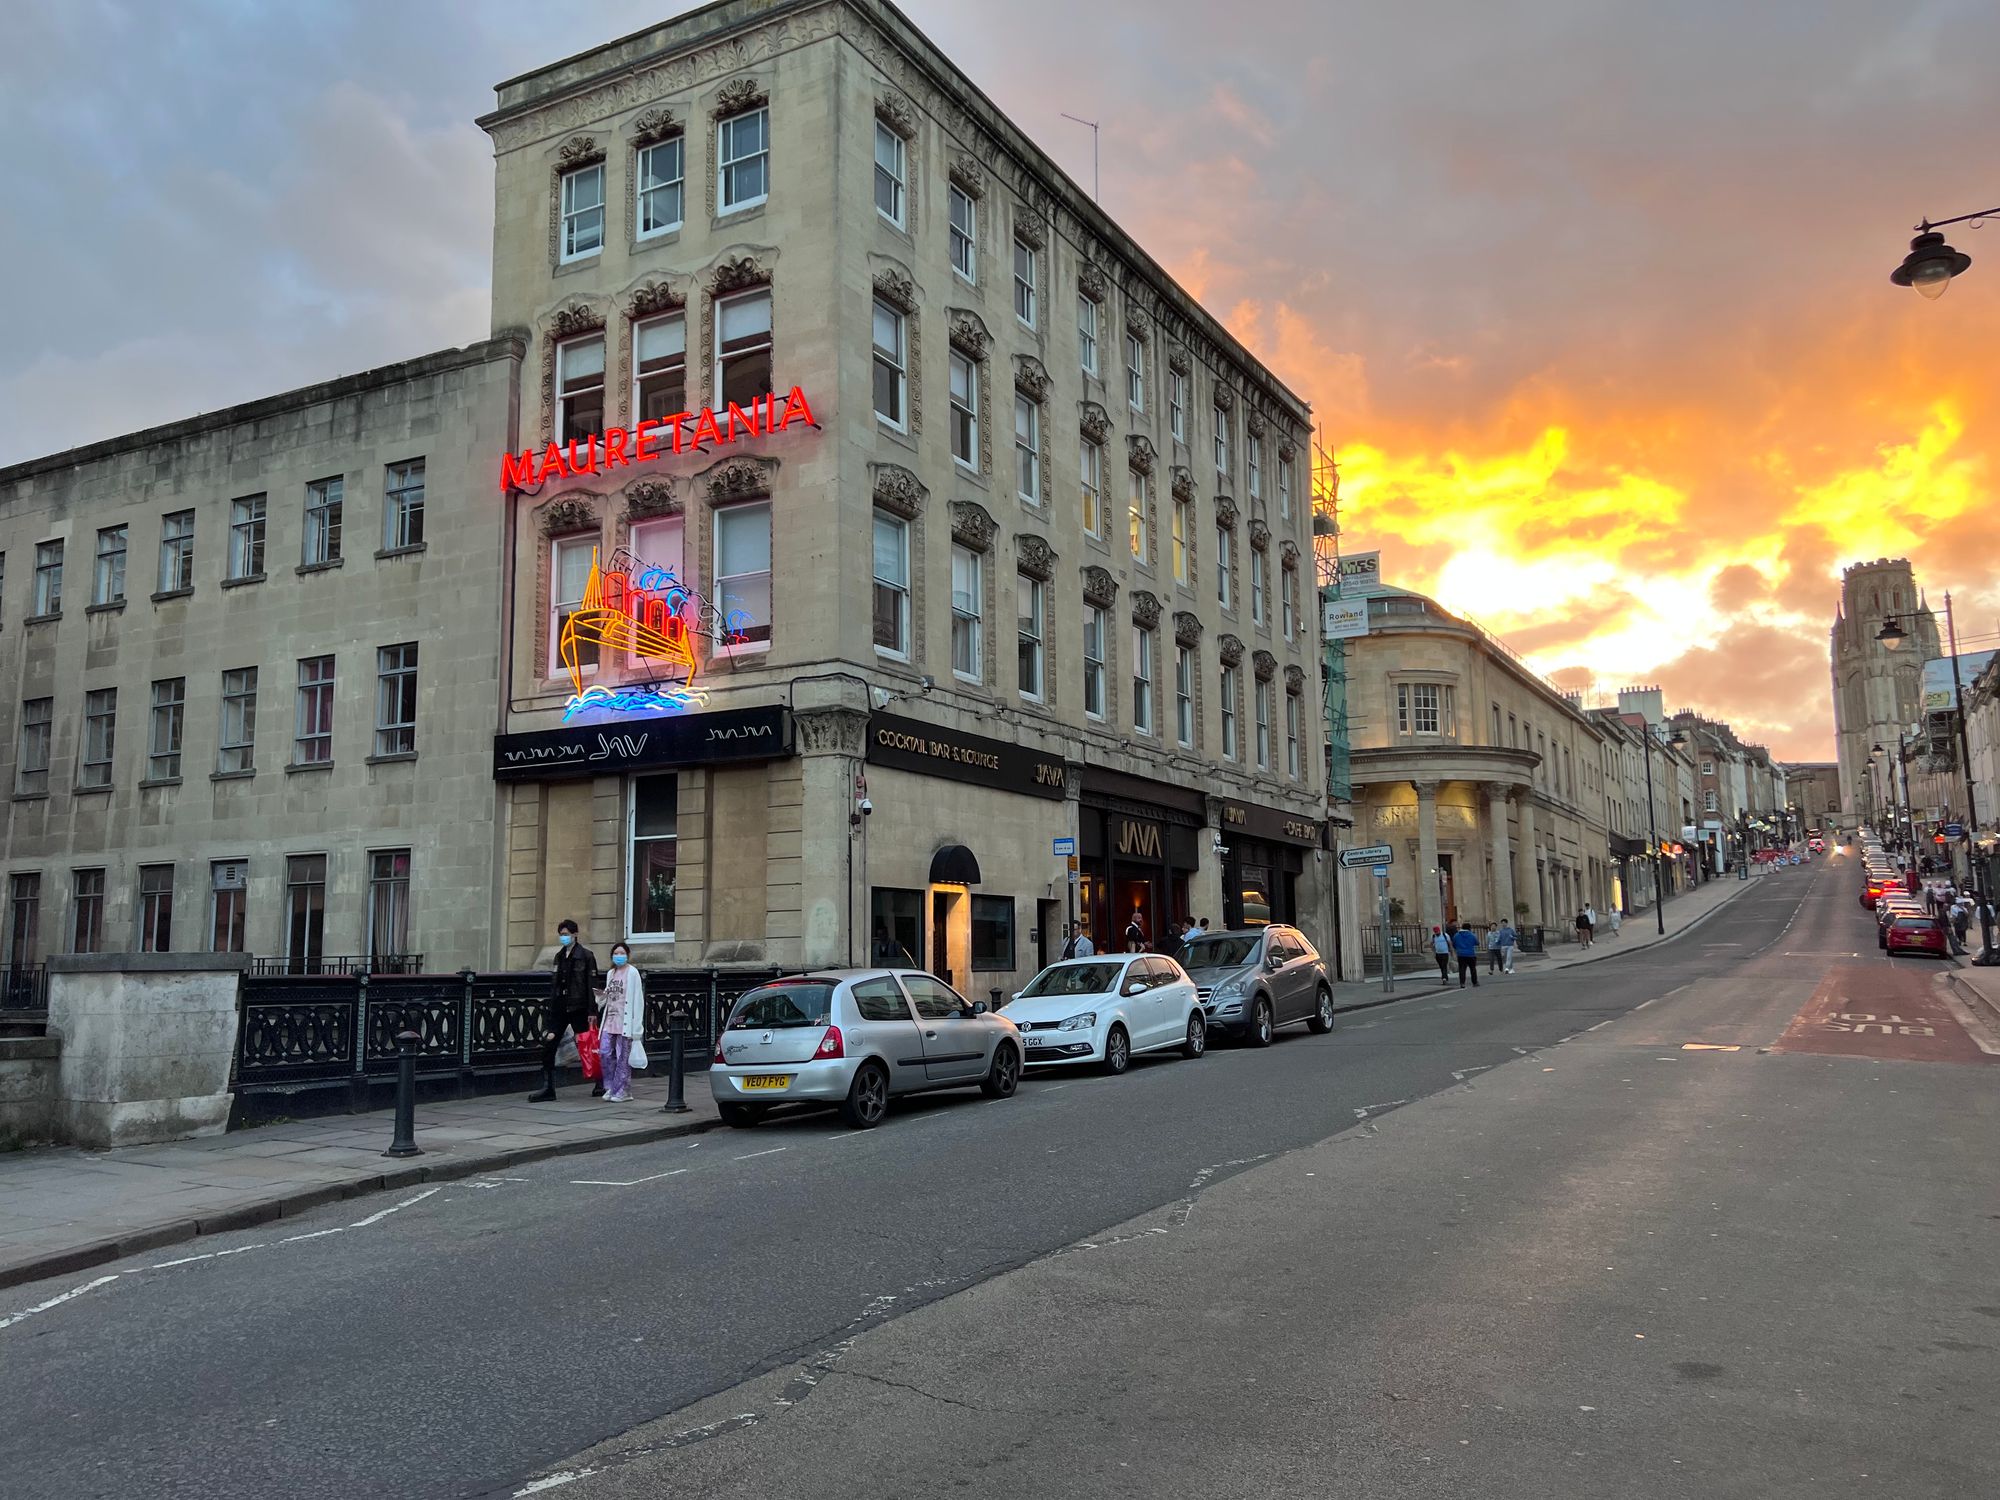 Looking up Park Street in Bristol towards a sunset. A neon sign with a picture of a ship reading "MAURETANIA" is lit up.